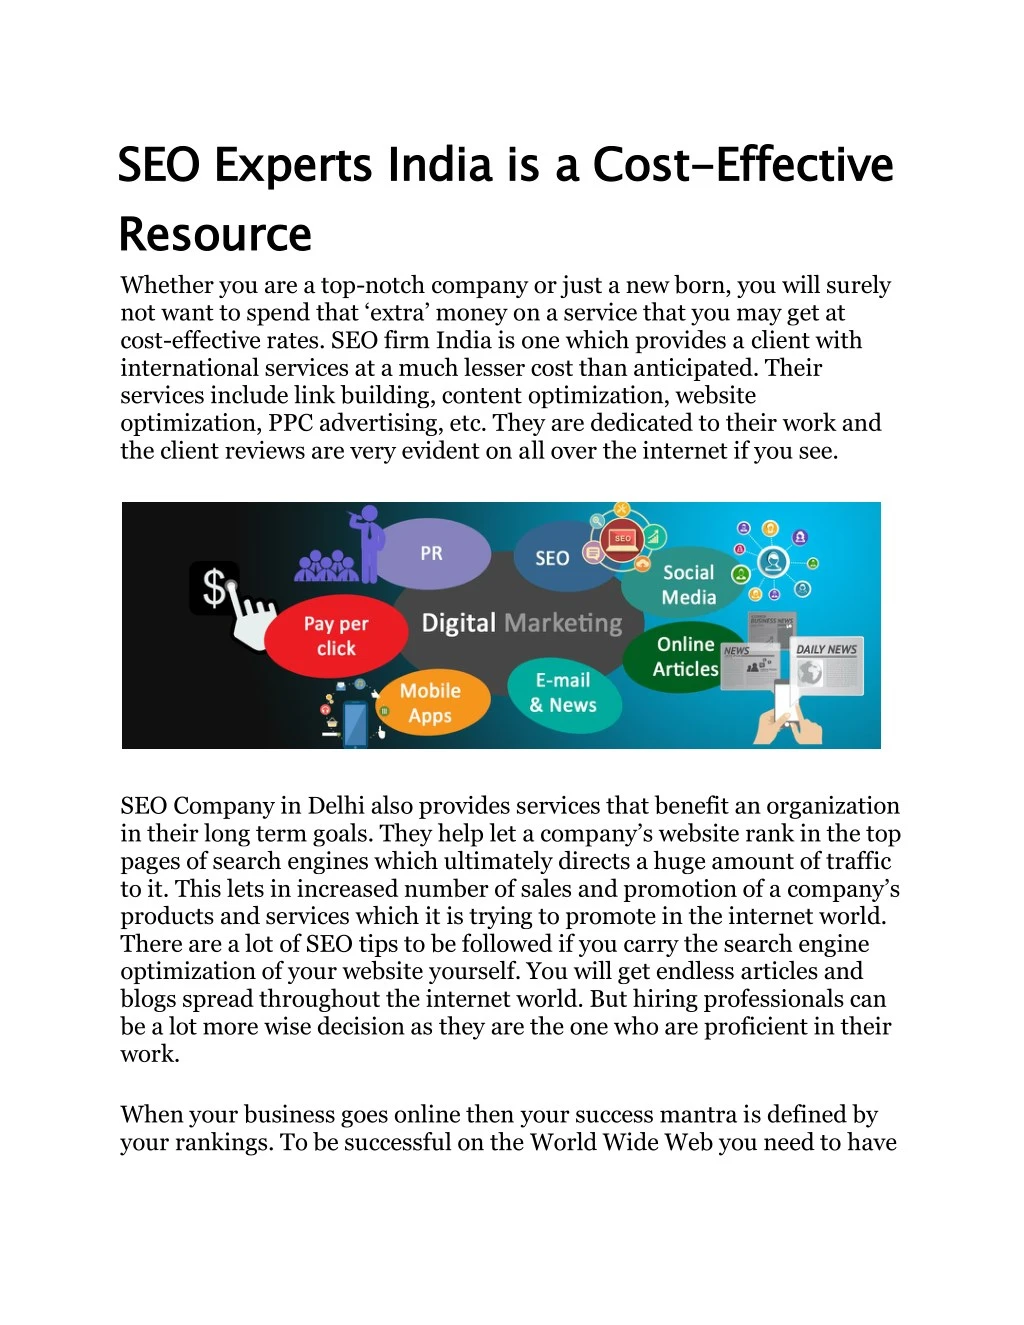 seo experts india resource whether